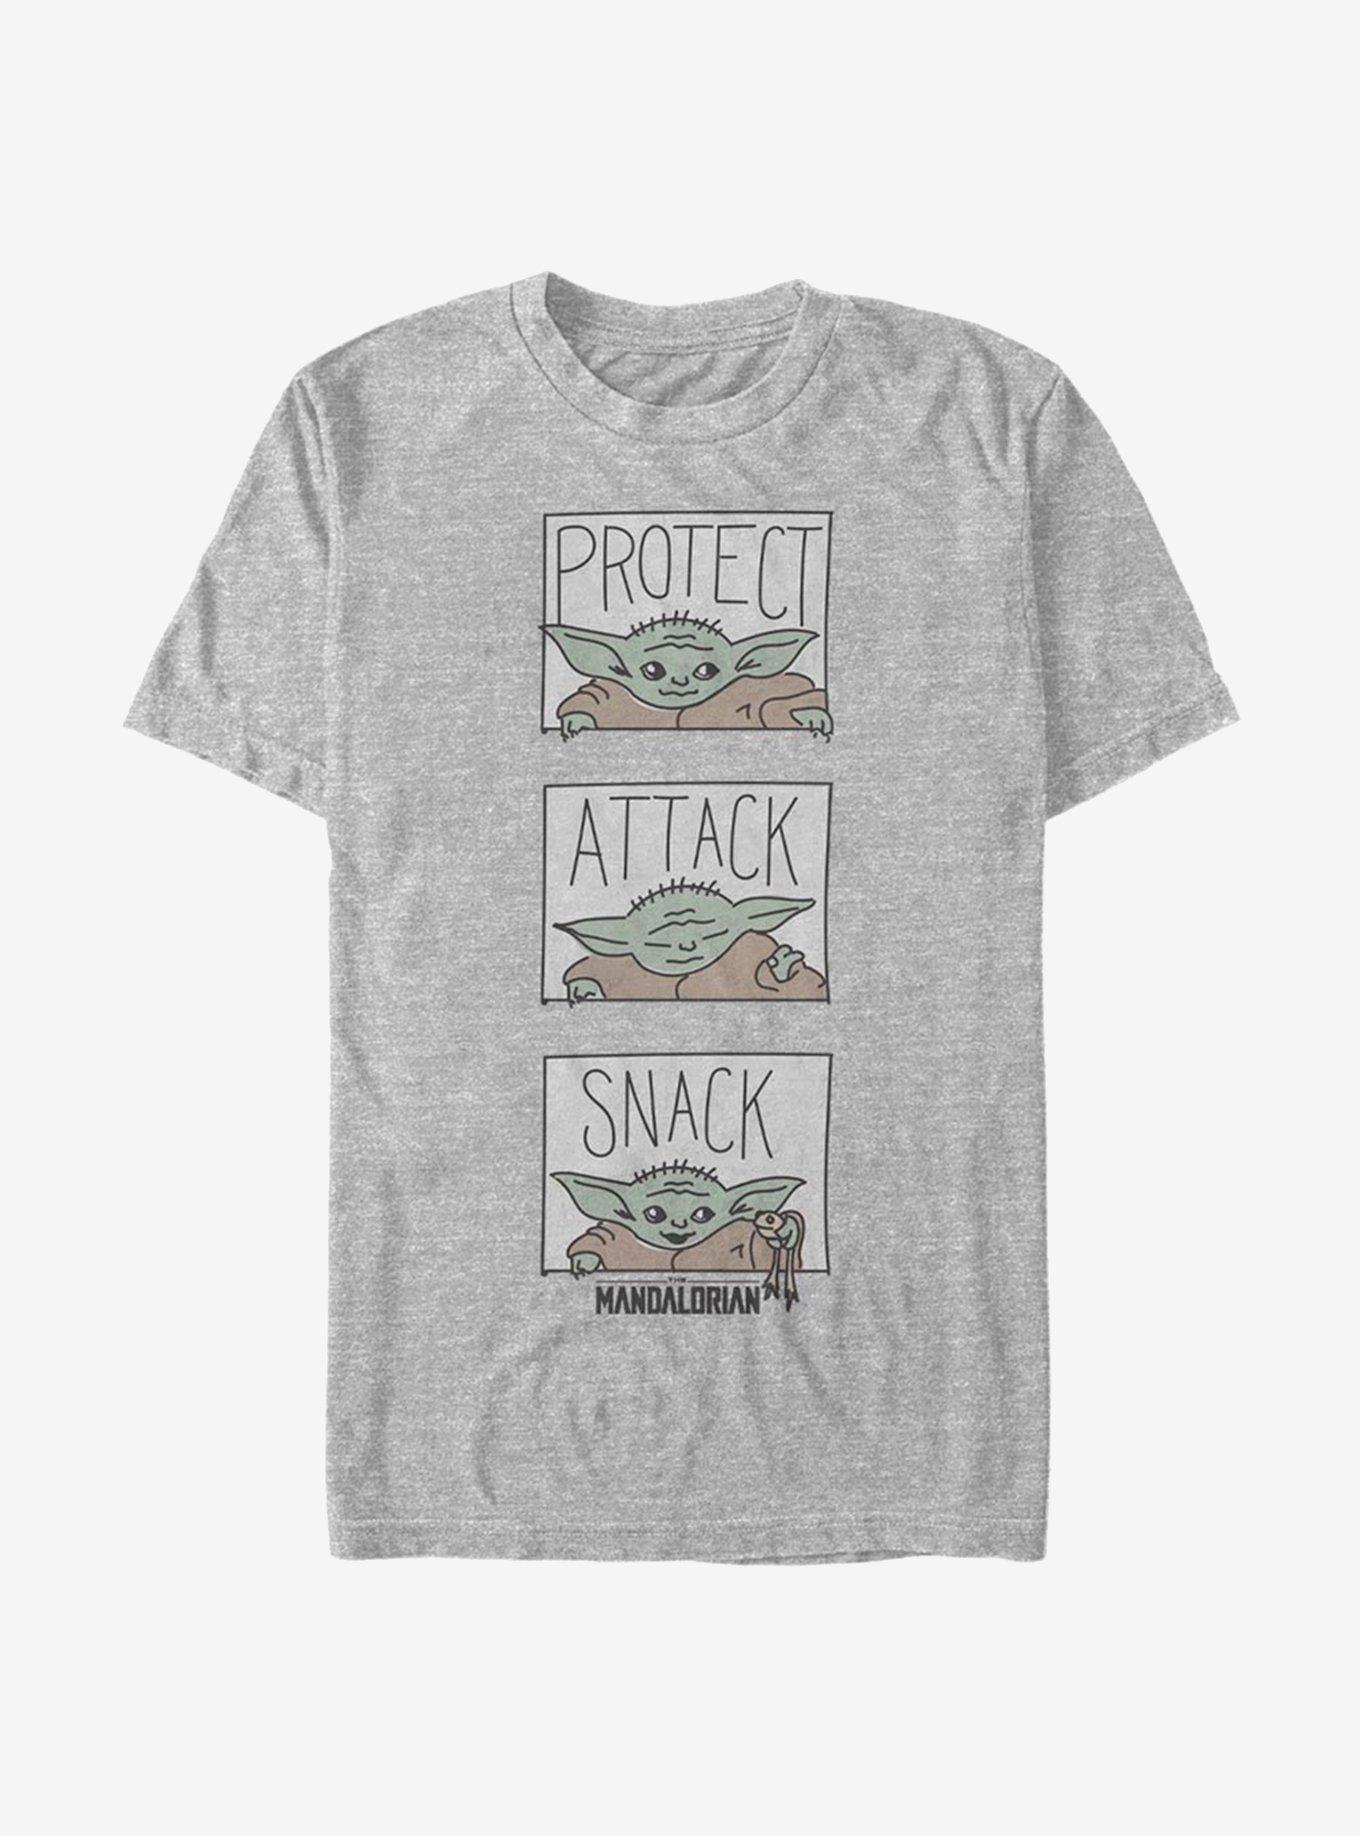 Star Wars The Mandalorian The Child Protect Attack Snack T-Shirt, ATH HTR, hi-res